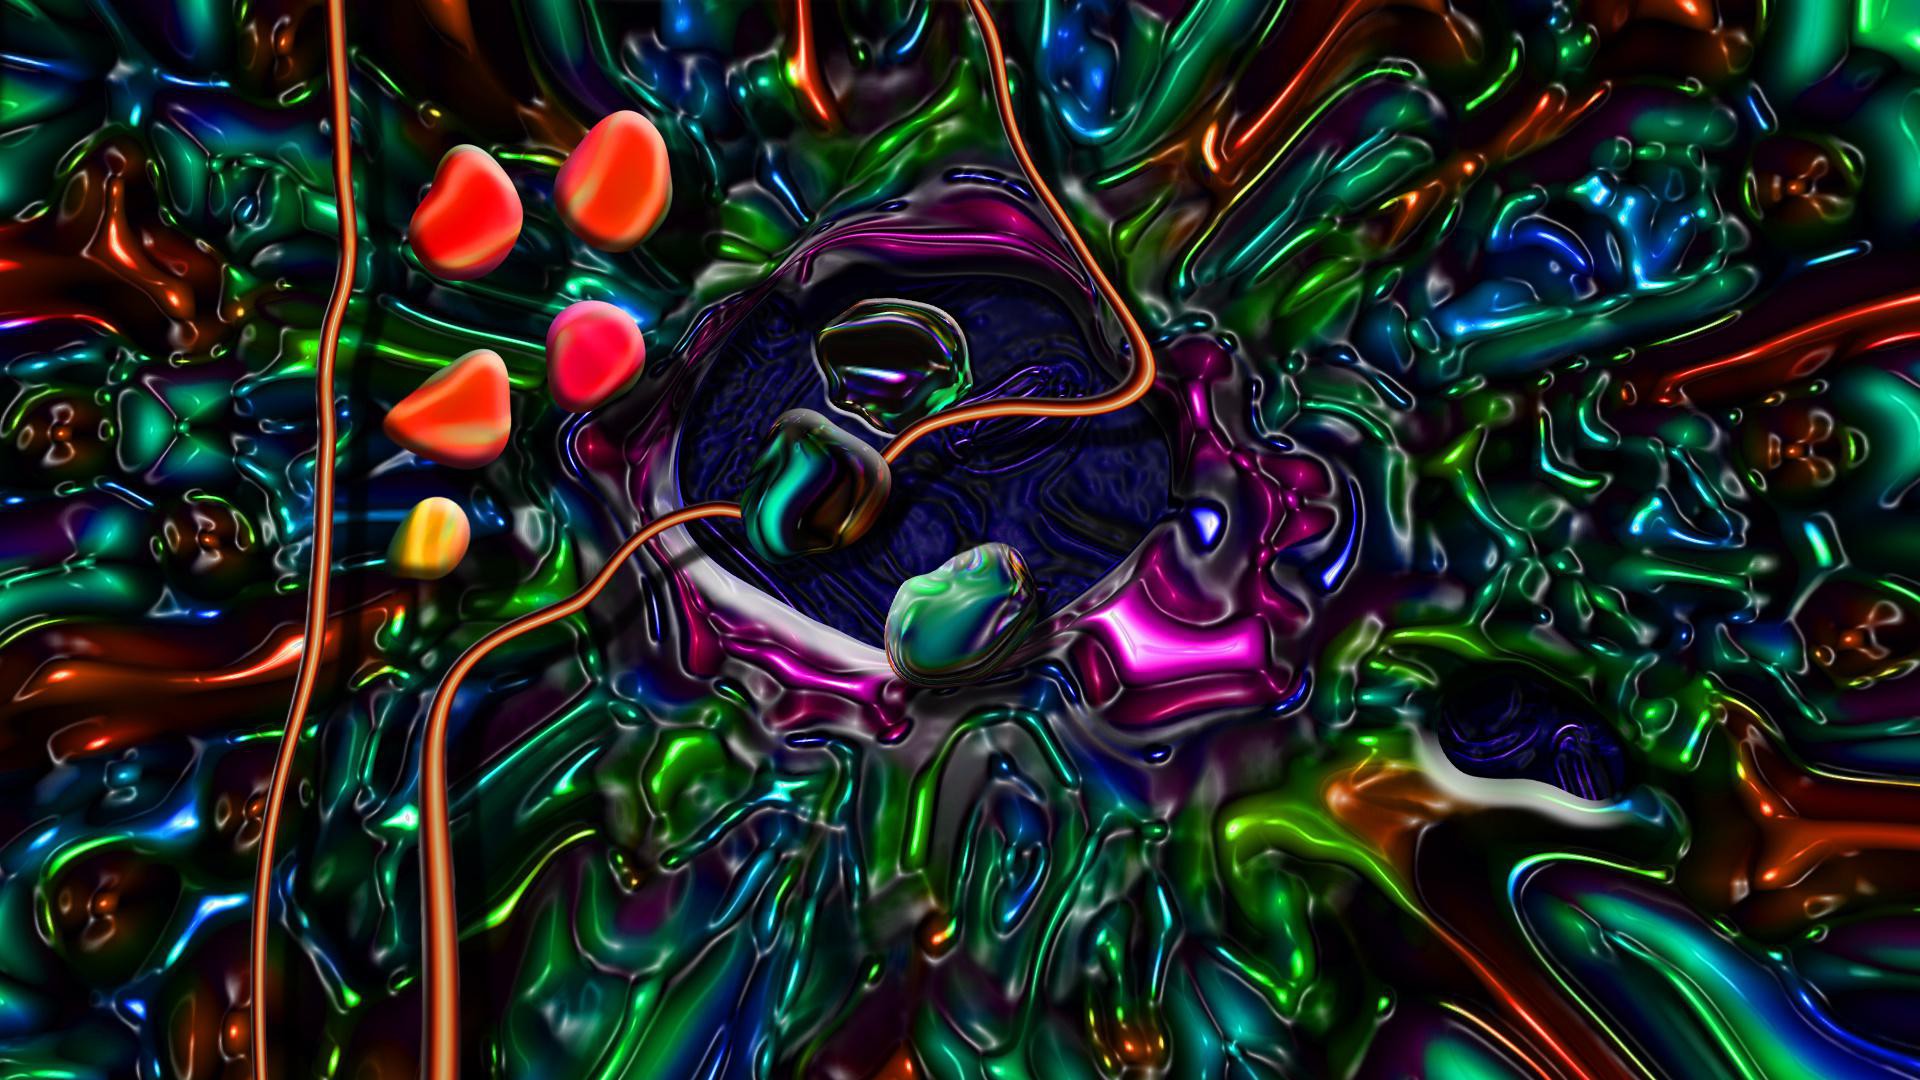 Trippy Wallpaper Amp Psychedelic Background HD New